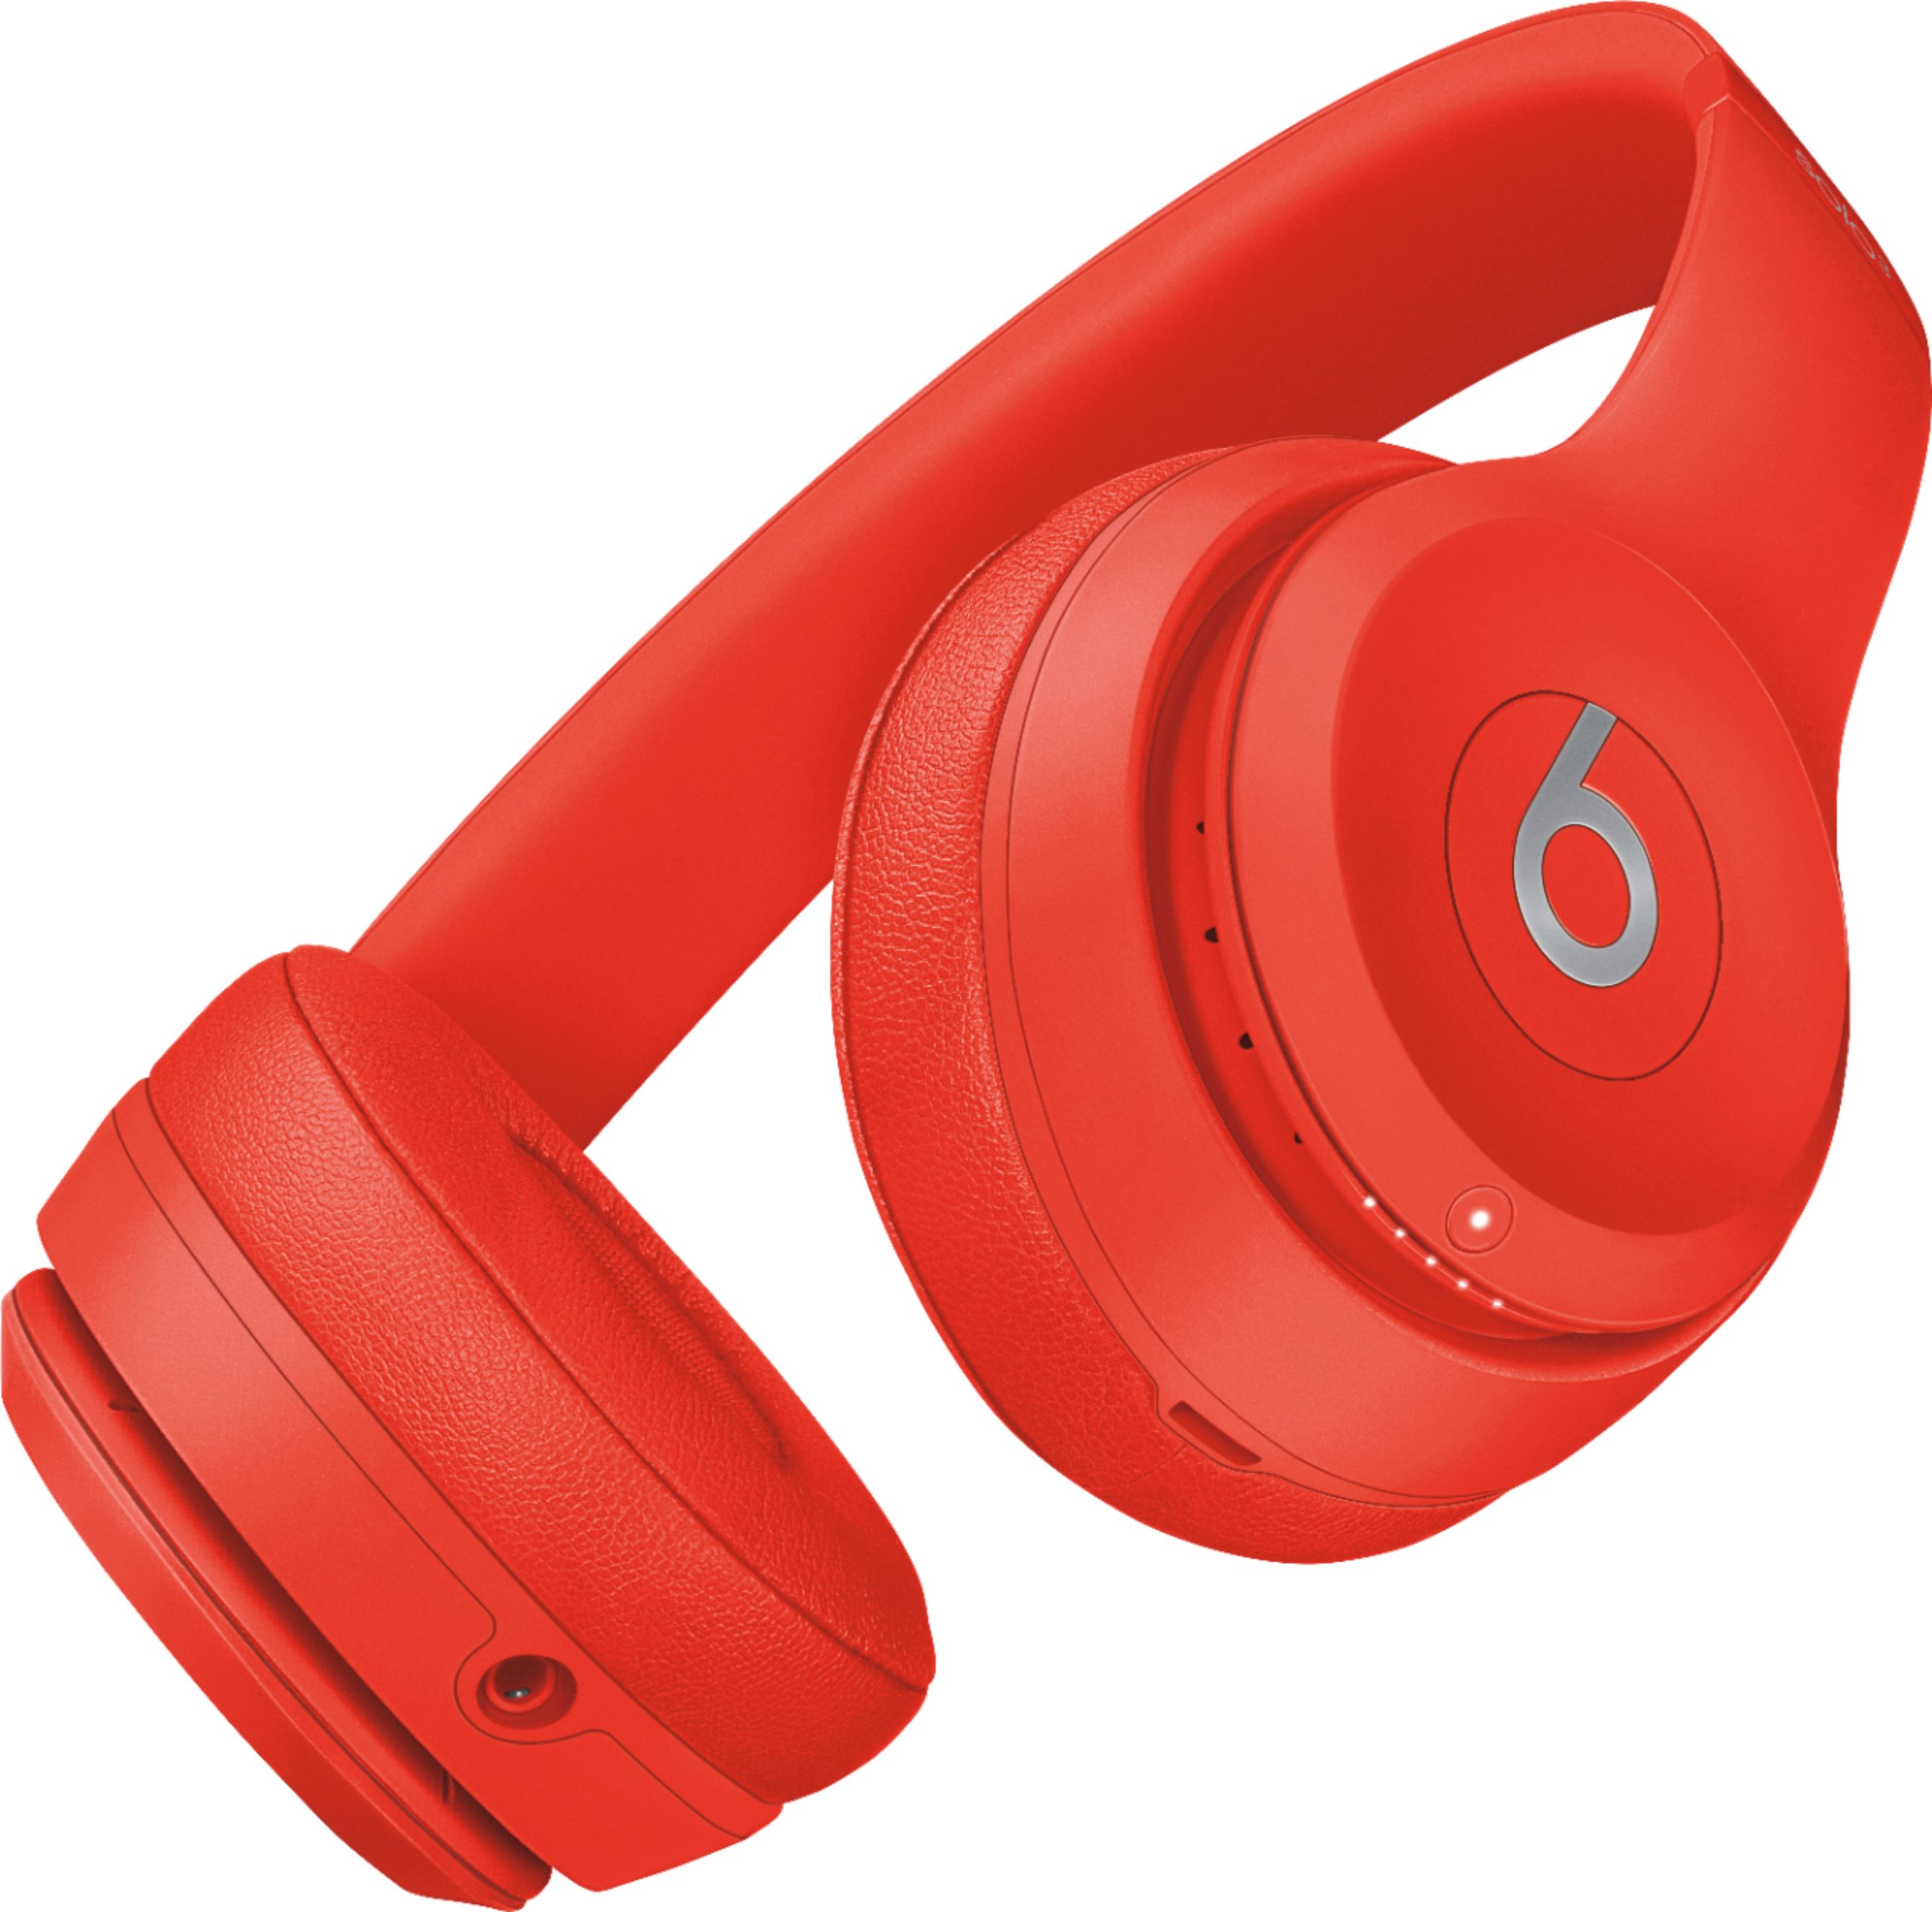 Beats by Dr. Dre On-Ear Headphones Citrus Red MX472LL/A Best Buy